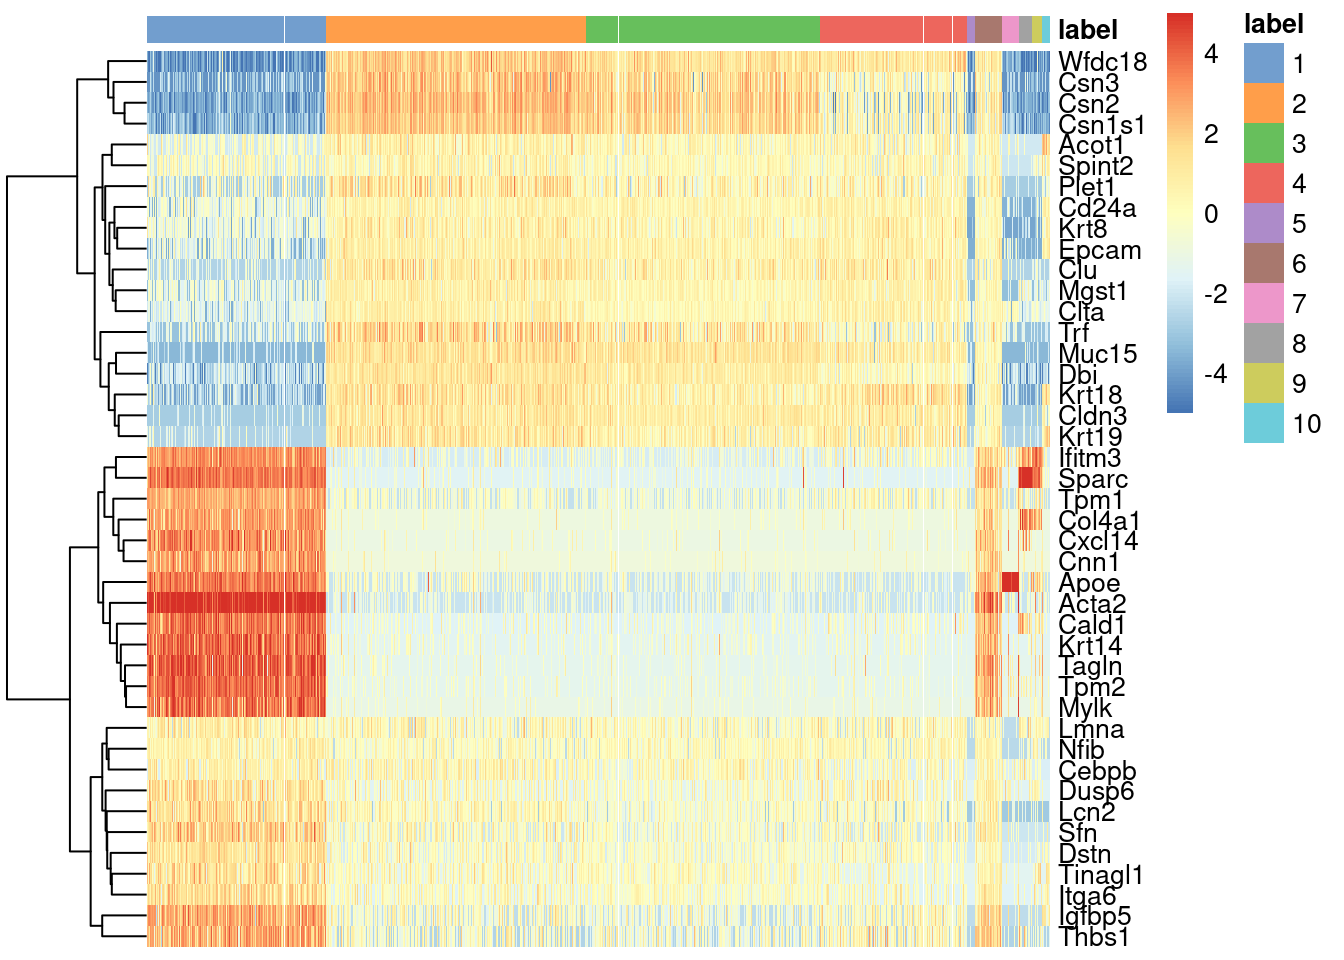 Heatmap of mean-centered and normalized log-expression values for the top set of markers for cluster 6 in the mammary gland dataset. Column colours represent the cluster to which each cell is assigned, as indicated by the legend.